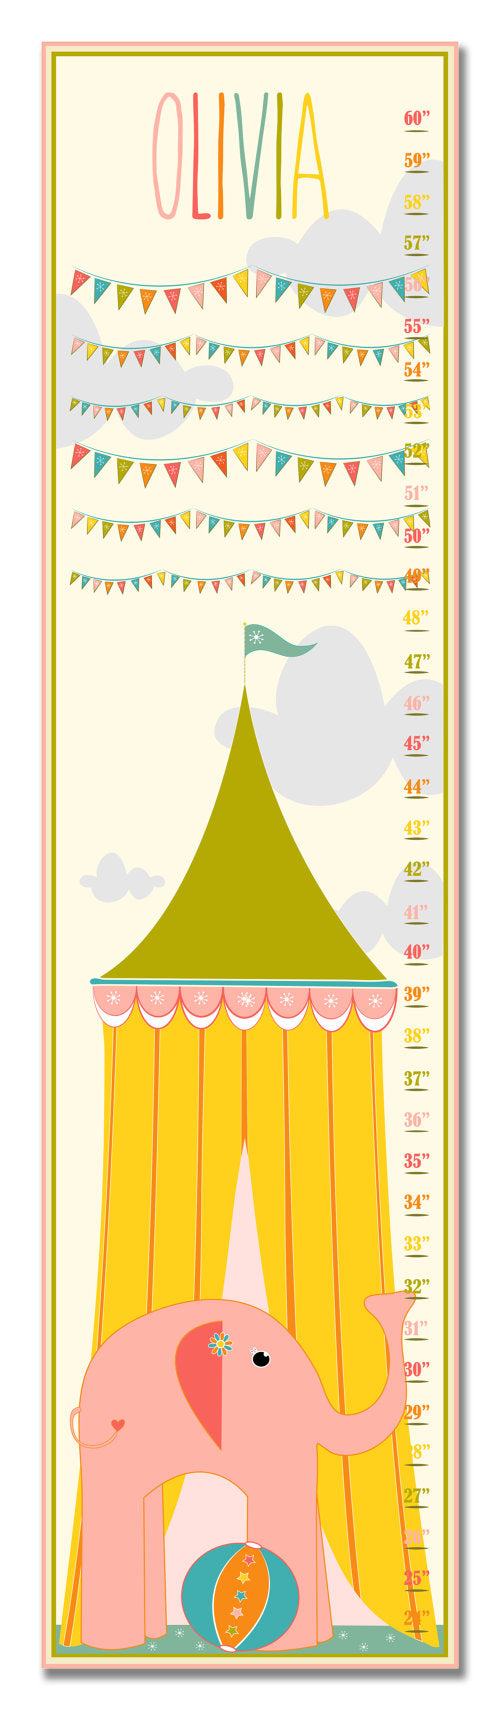 Circus Tent Personalized Growth Chart - Baby Gifts